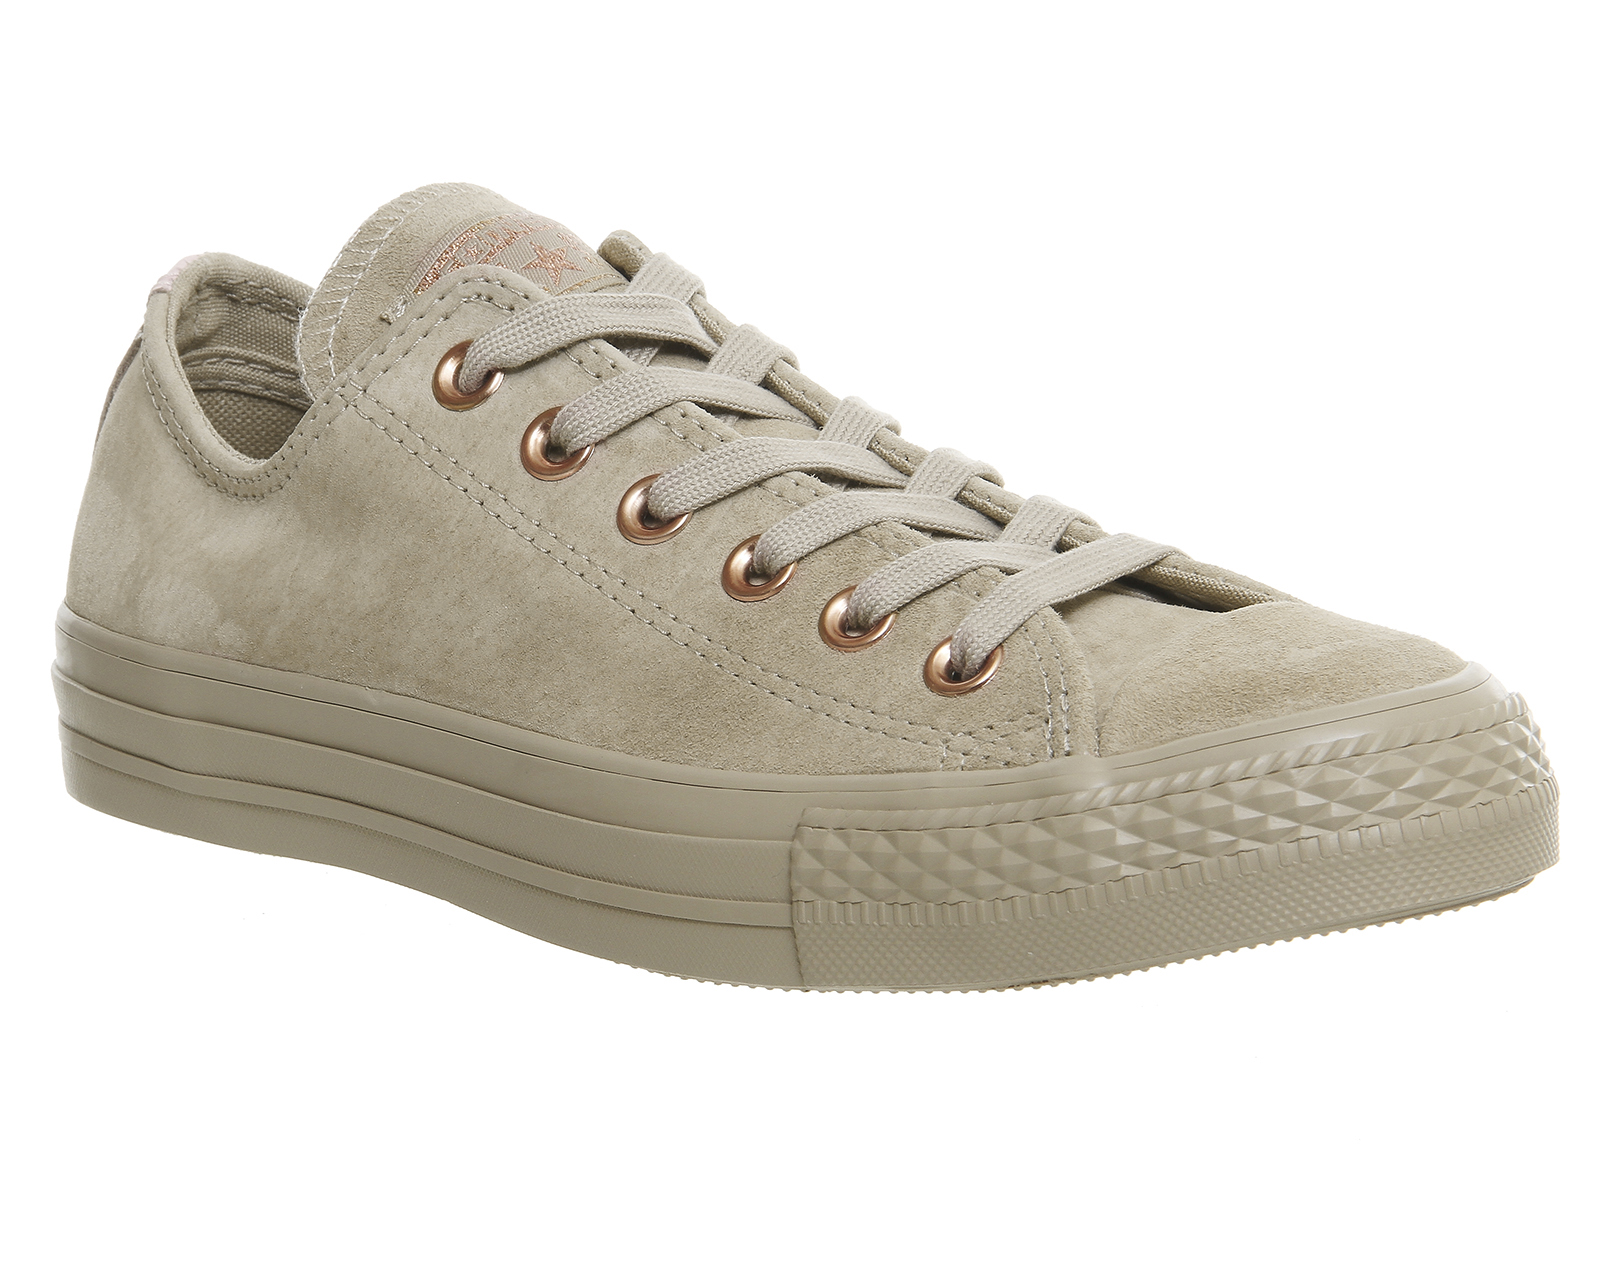 Converse All Star Low Leather Trainers Vintage Khaki Vapour Pink Exclusive  - Hers trainers